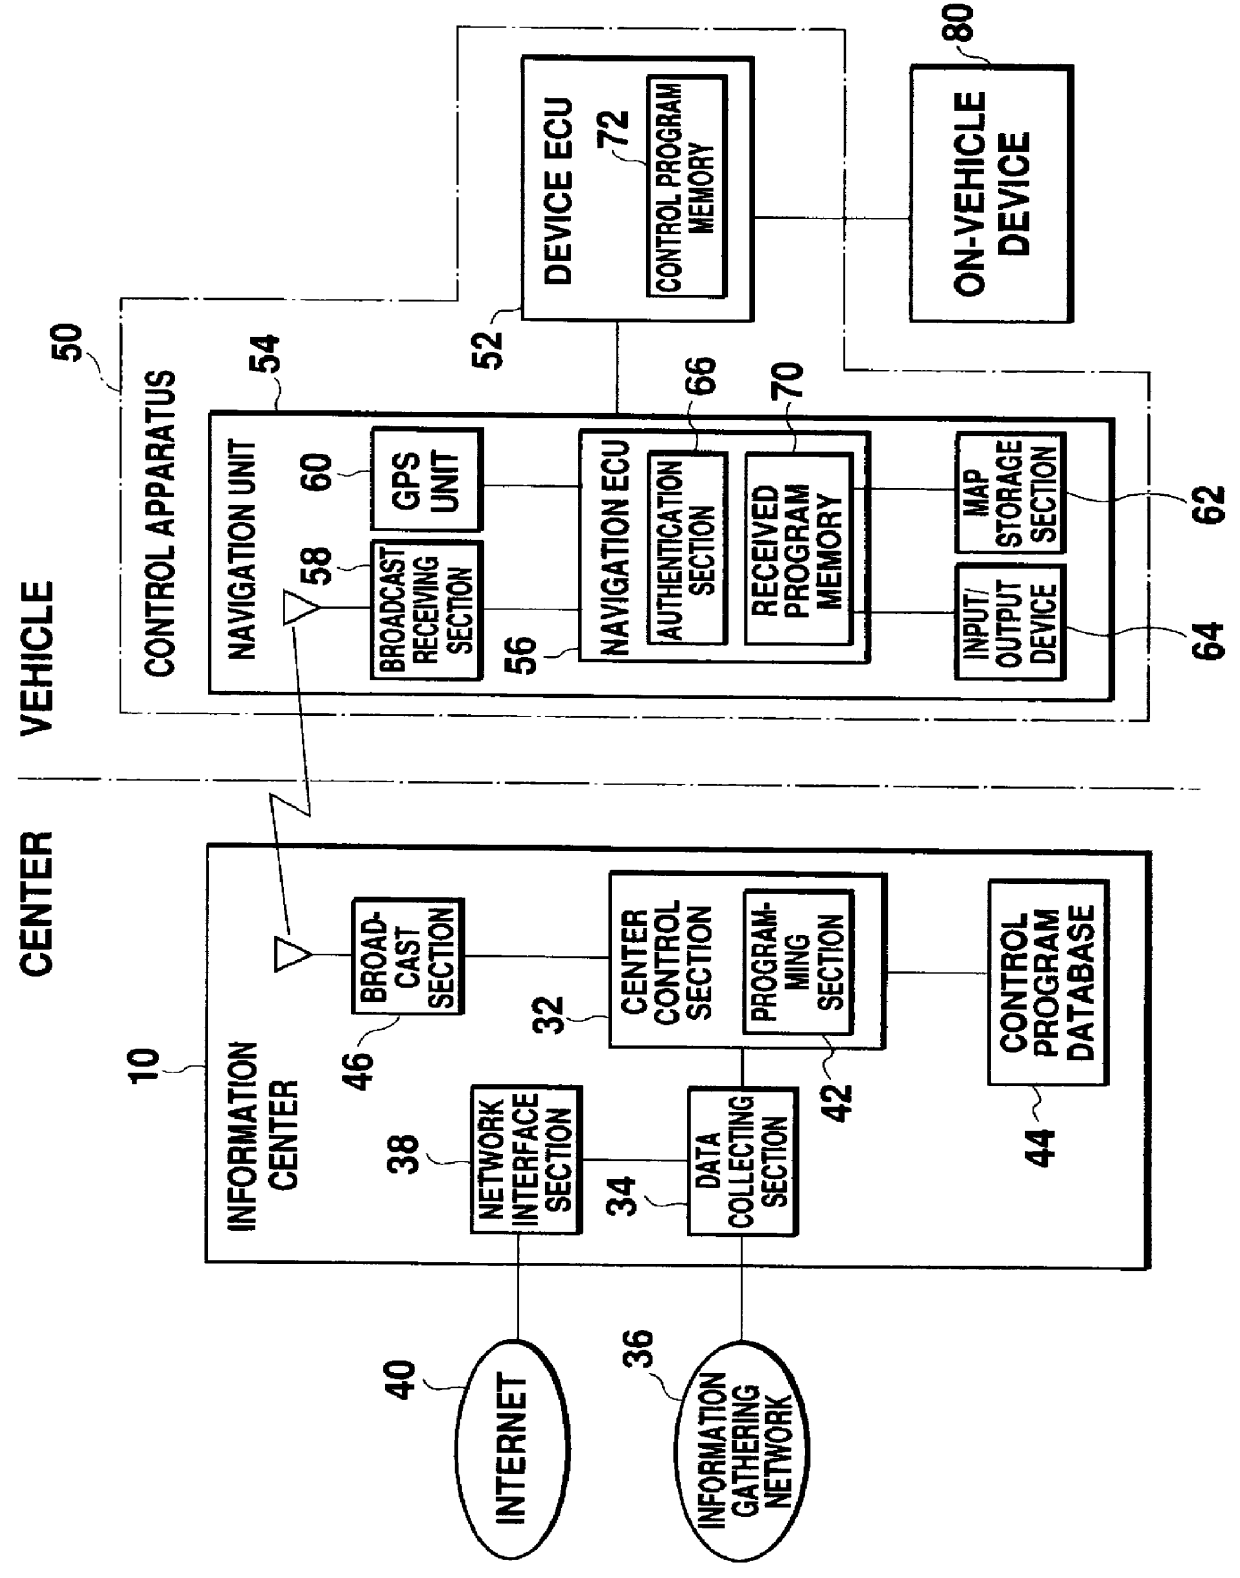 On-vehicle device control system and control apparatus therein